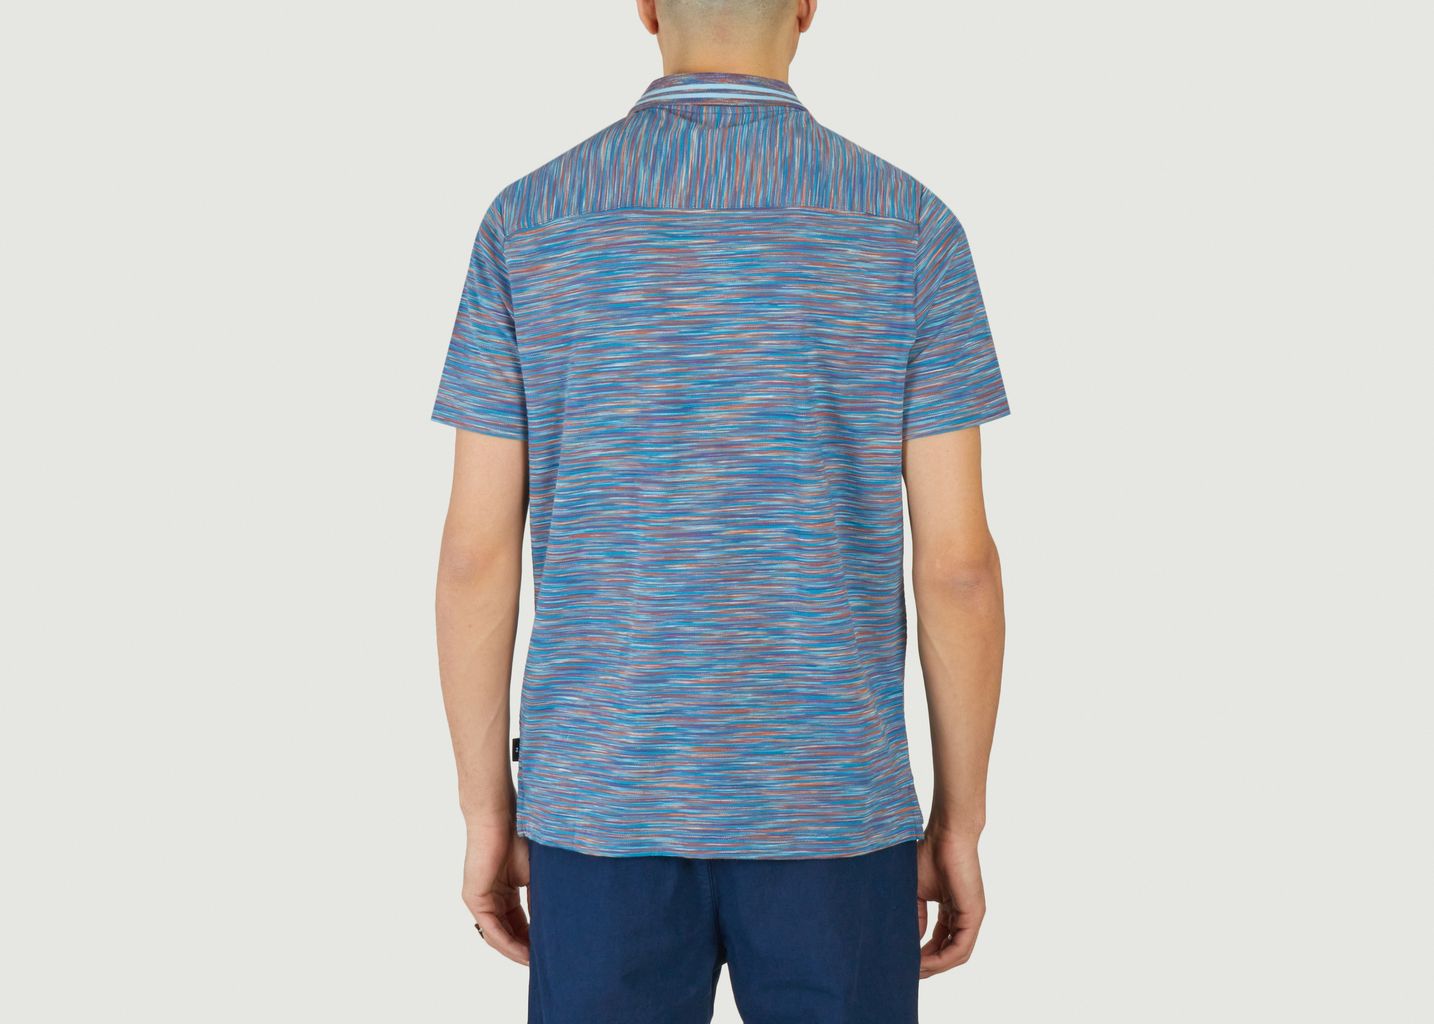 Space Dye Polo Shirt - PS by PAUL SMITH